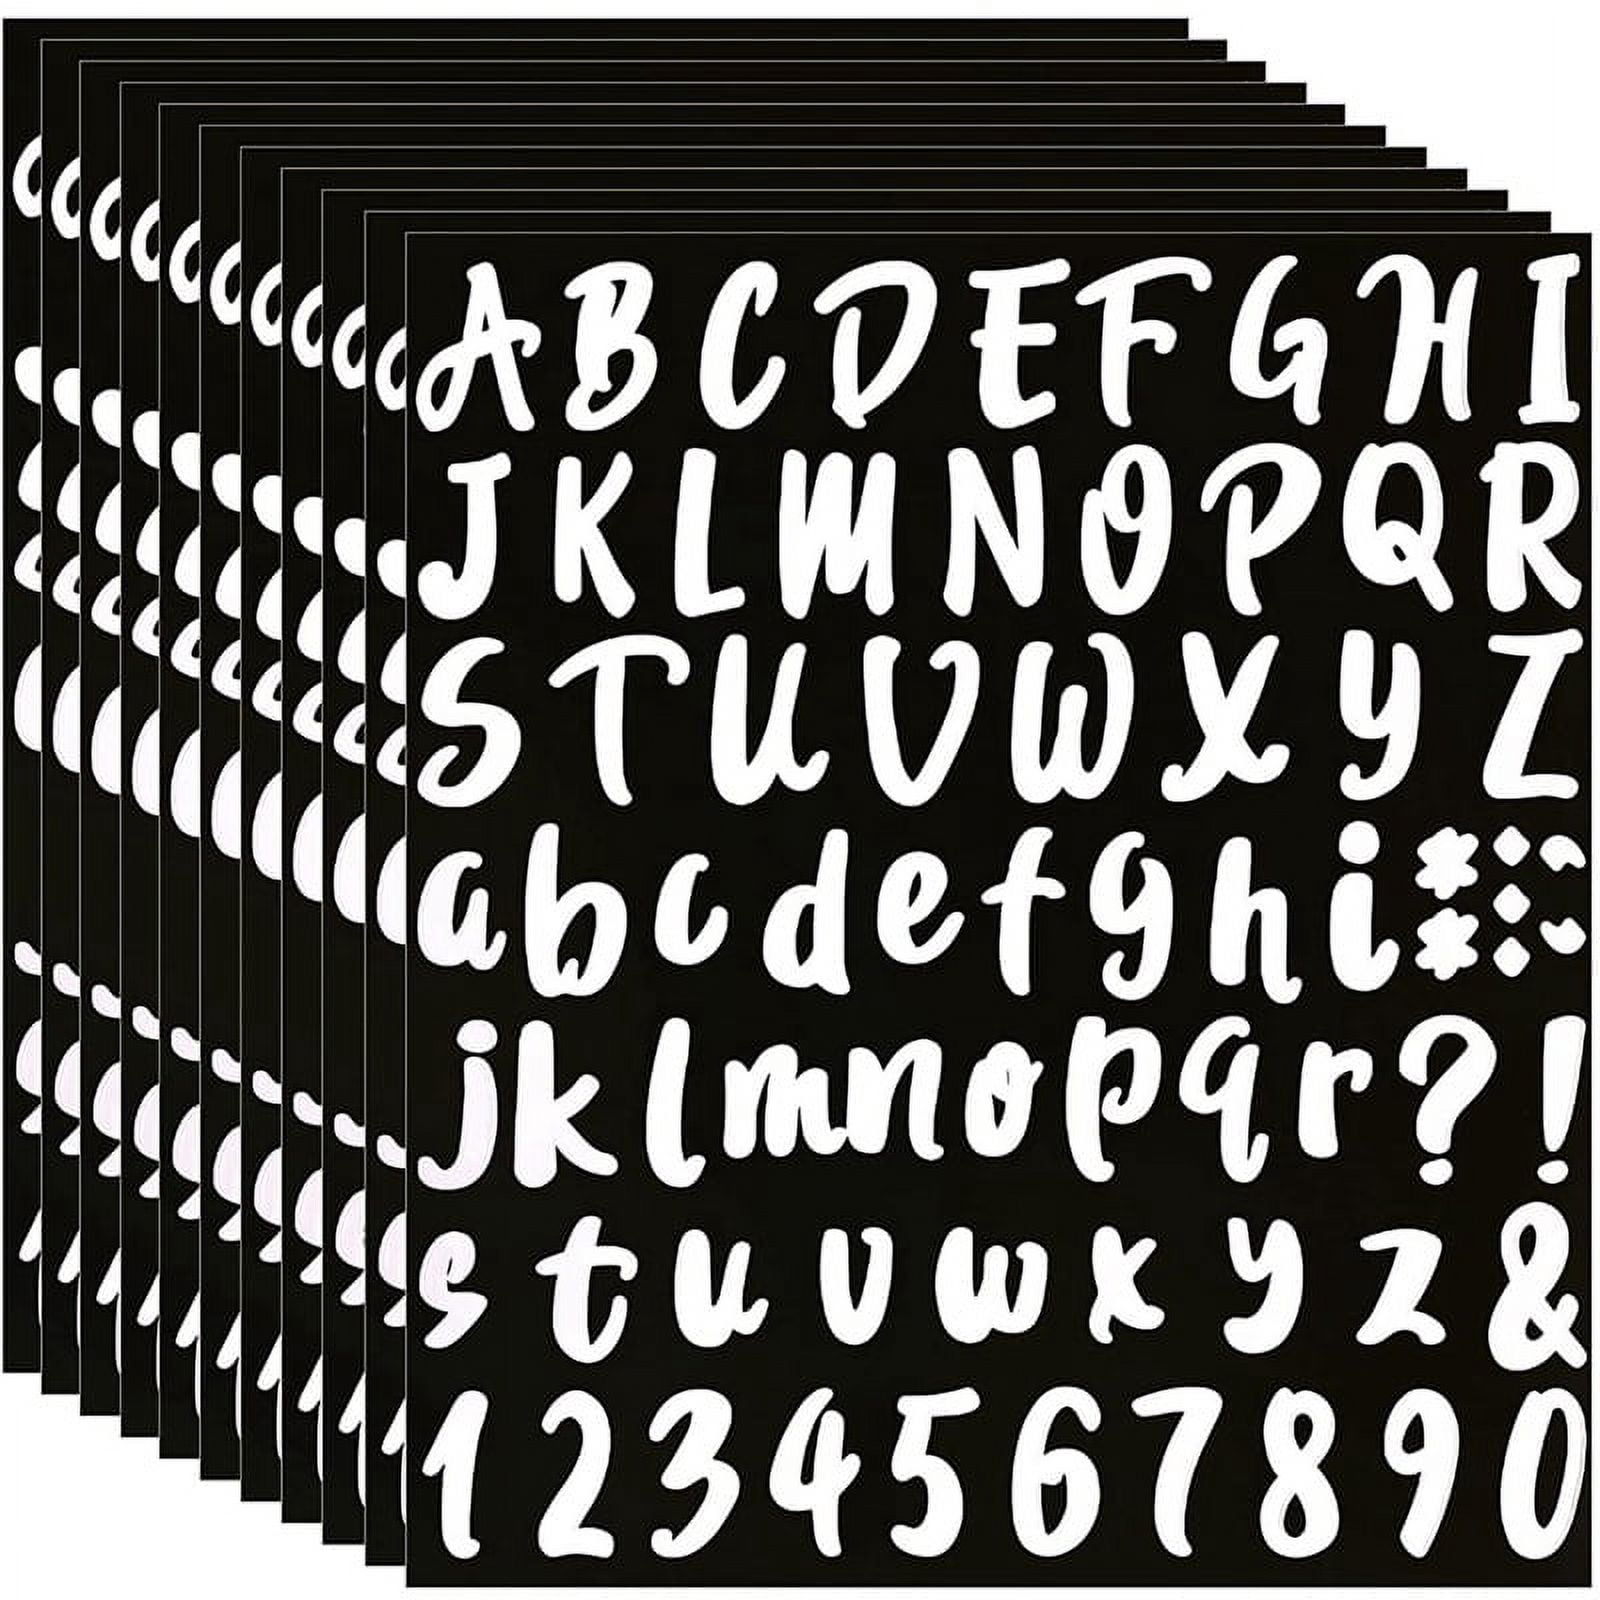 720 Pieces 10 Sheets Self-adhesive Vinyl Sticker, Alphabet Letter Number  Stickers For Mailbox, Door